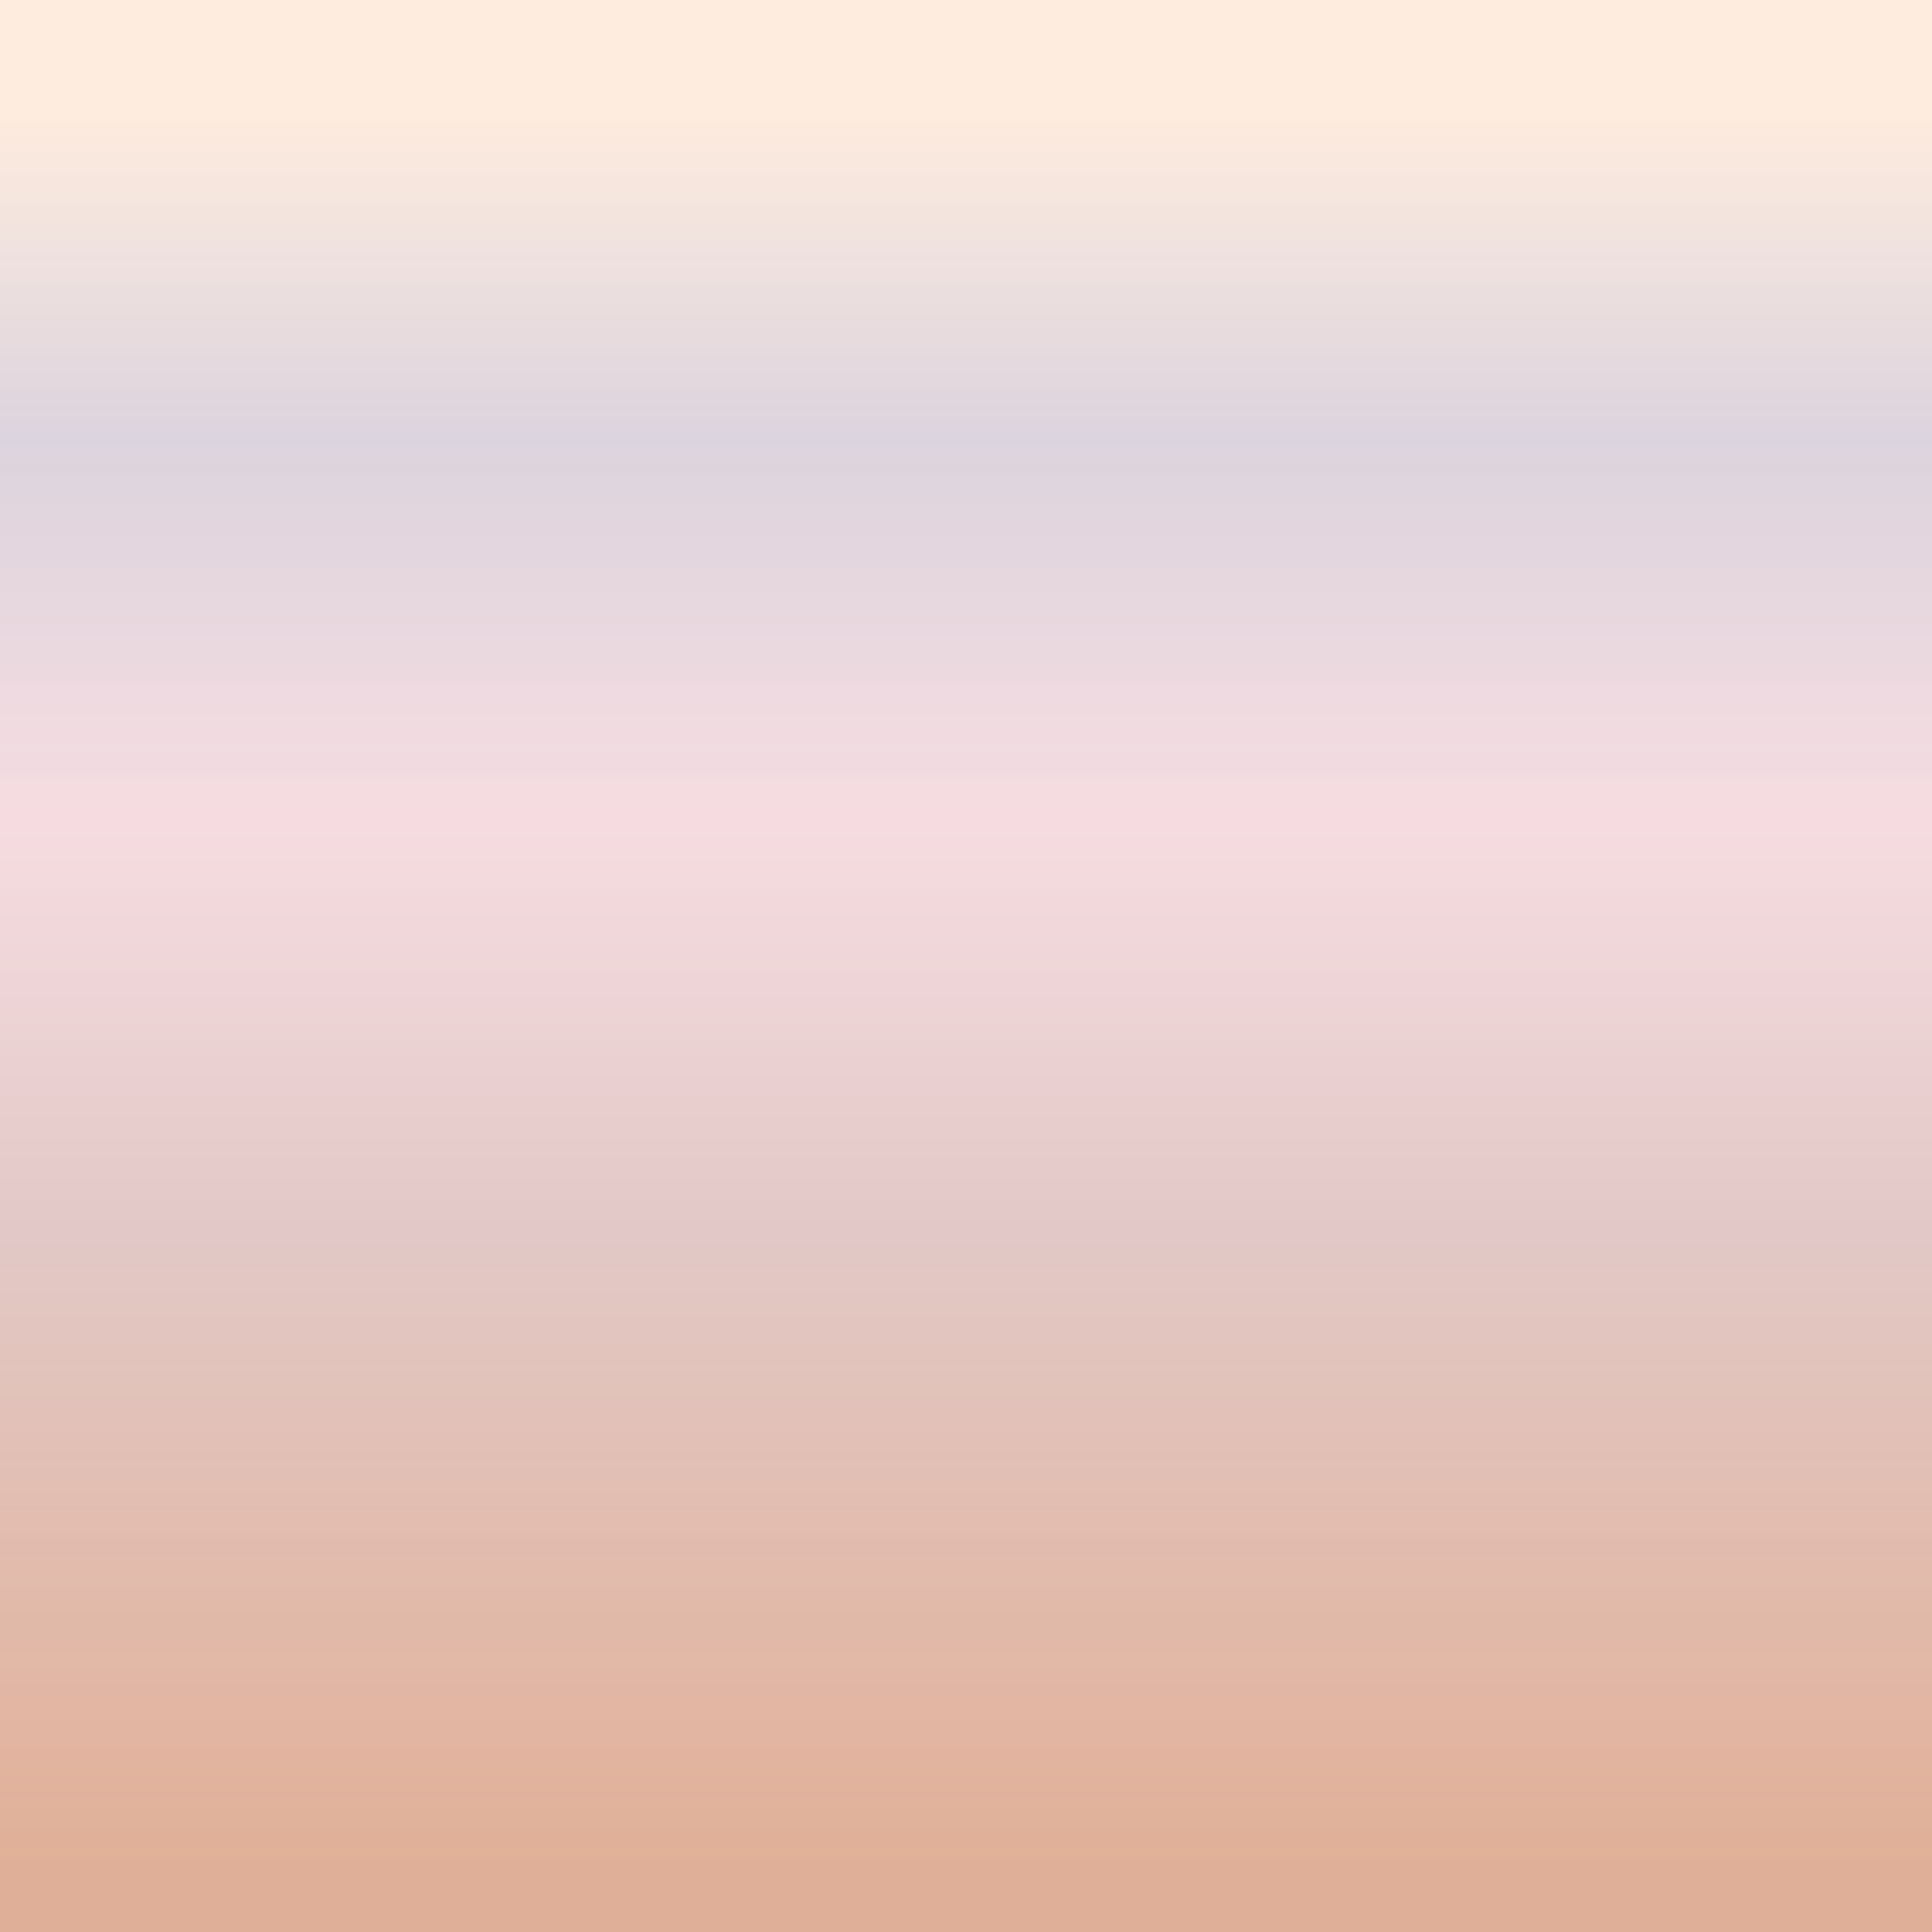 062320-19_Blur_Ombre_TerralonSmooth_062319-19-02 Pastel.png